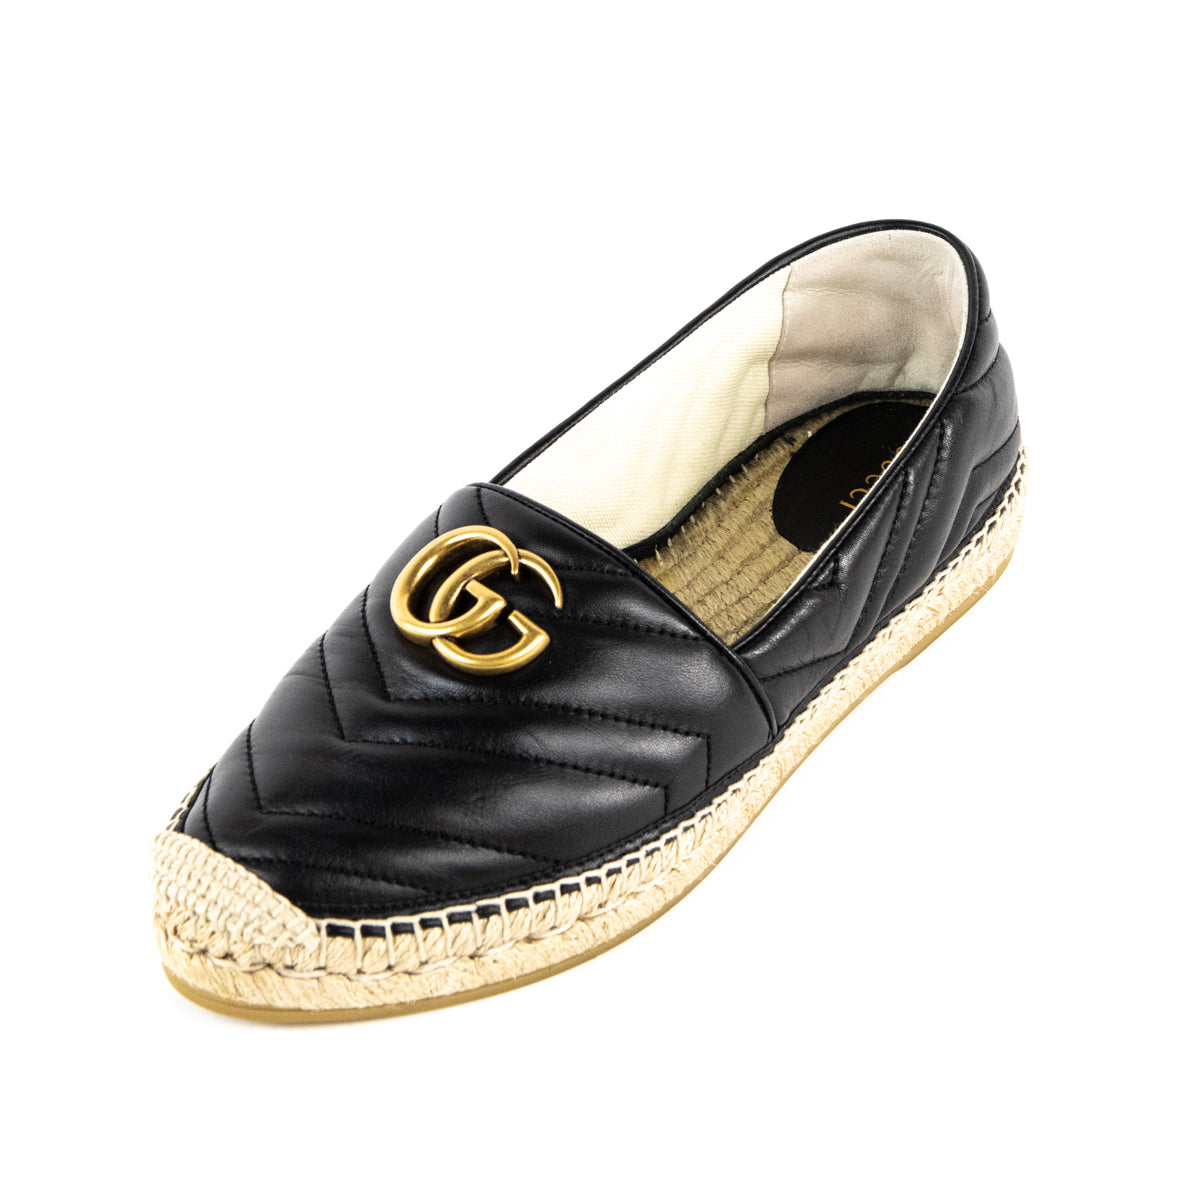 Gucci Black Leather Double GG Marmont Espadrilles Size US 9 | EU 39 - Love that Bag etc - Preowned Authentic Designer Handbags & Preloved Fashions